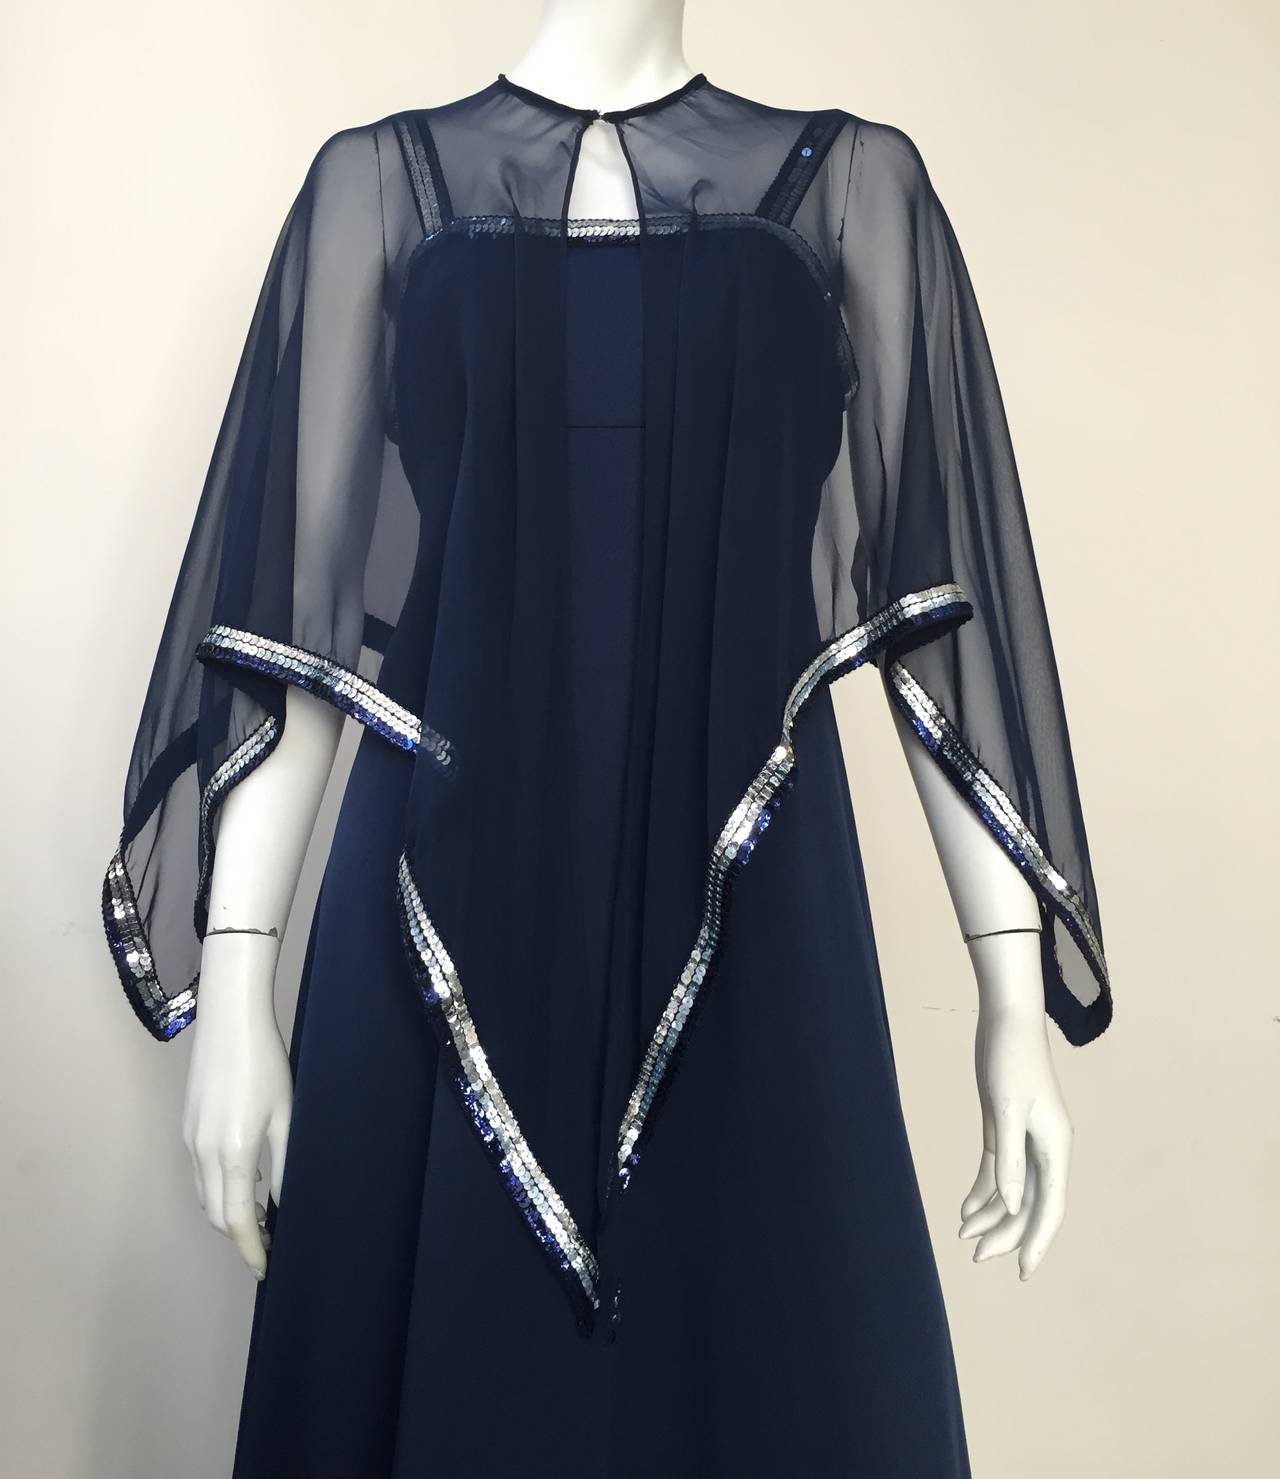 Estevez 1970s navy jersey gown & chiffon capelet both trimmed in sequin. No size tag but fits a size large. This gown will fit a woman size 10/12 but please use measurements I will provide you so that you can measure yourself to make sure it